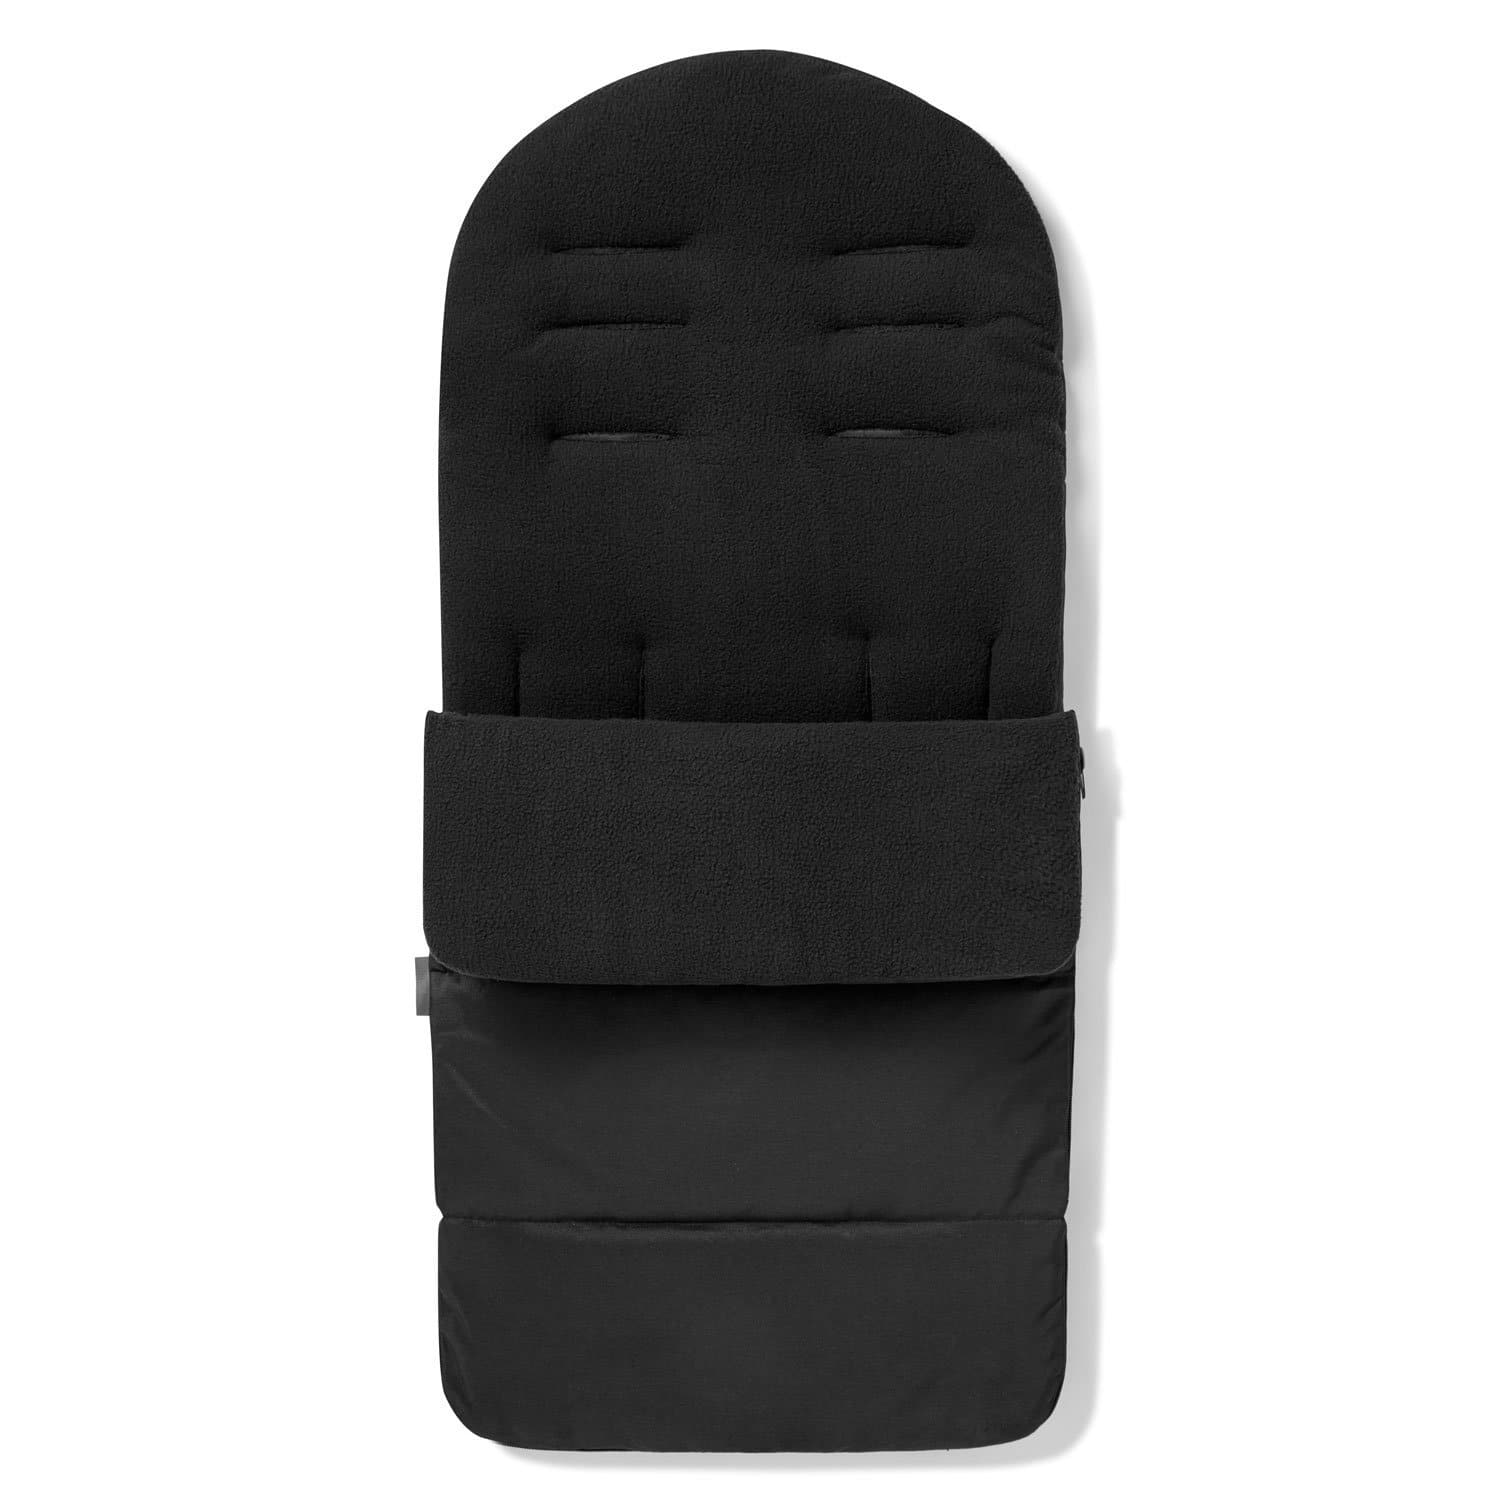 Premium Footmuff / Cosy Toes Compatible with Easywalker - Black Jack / Fits All Models | For Your Little One